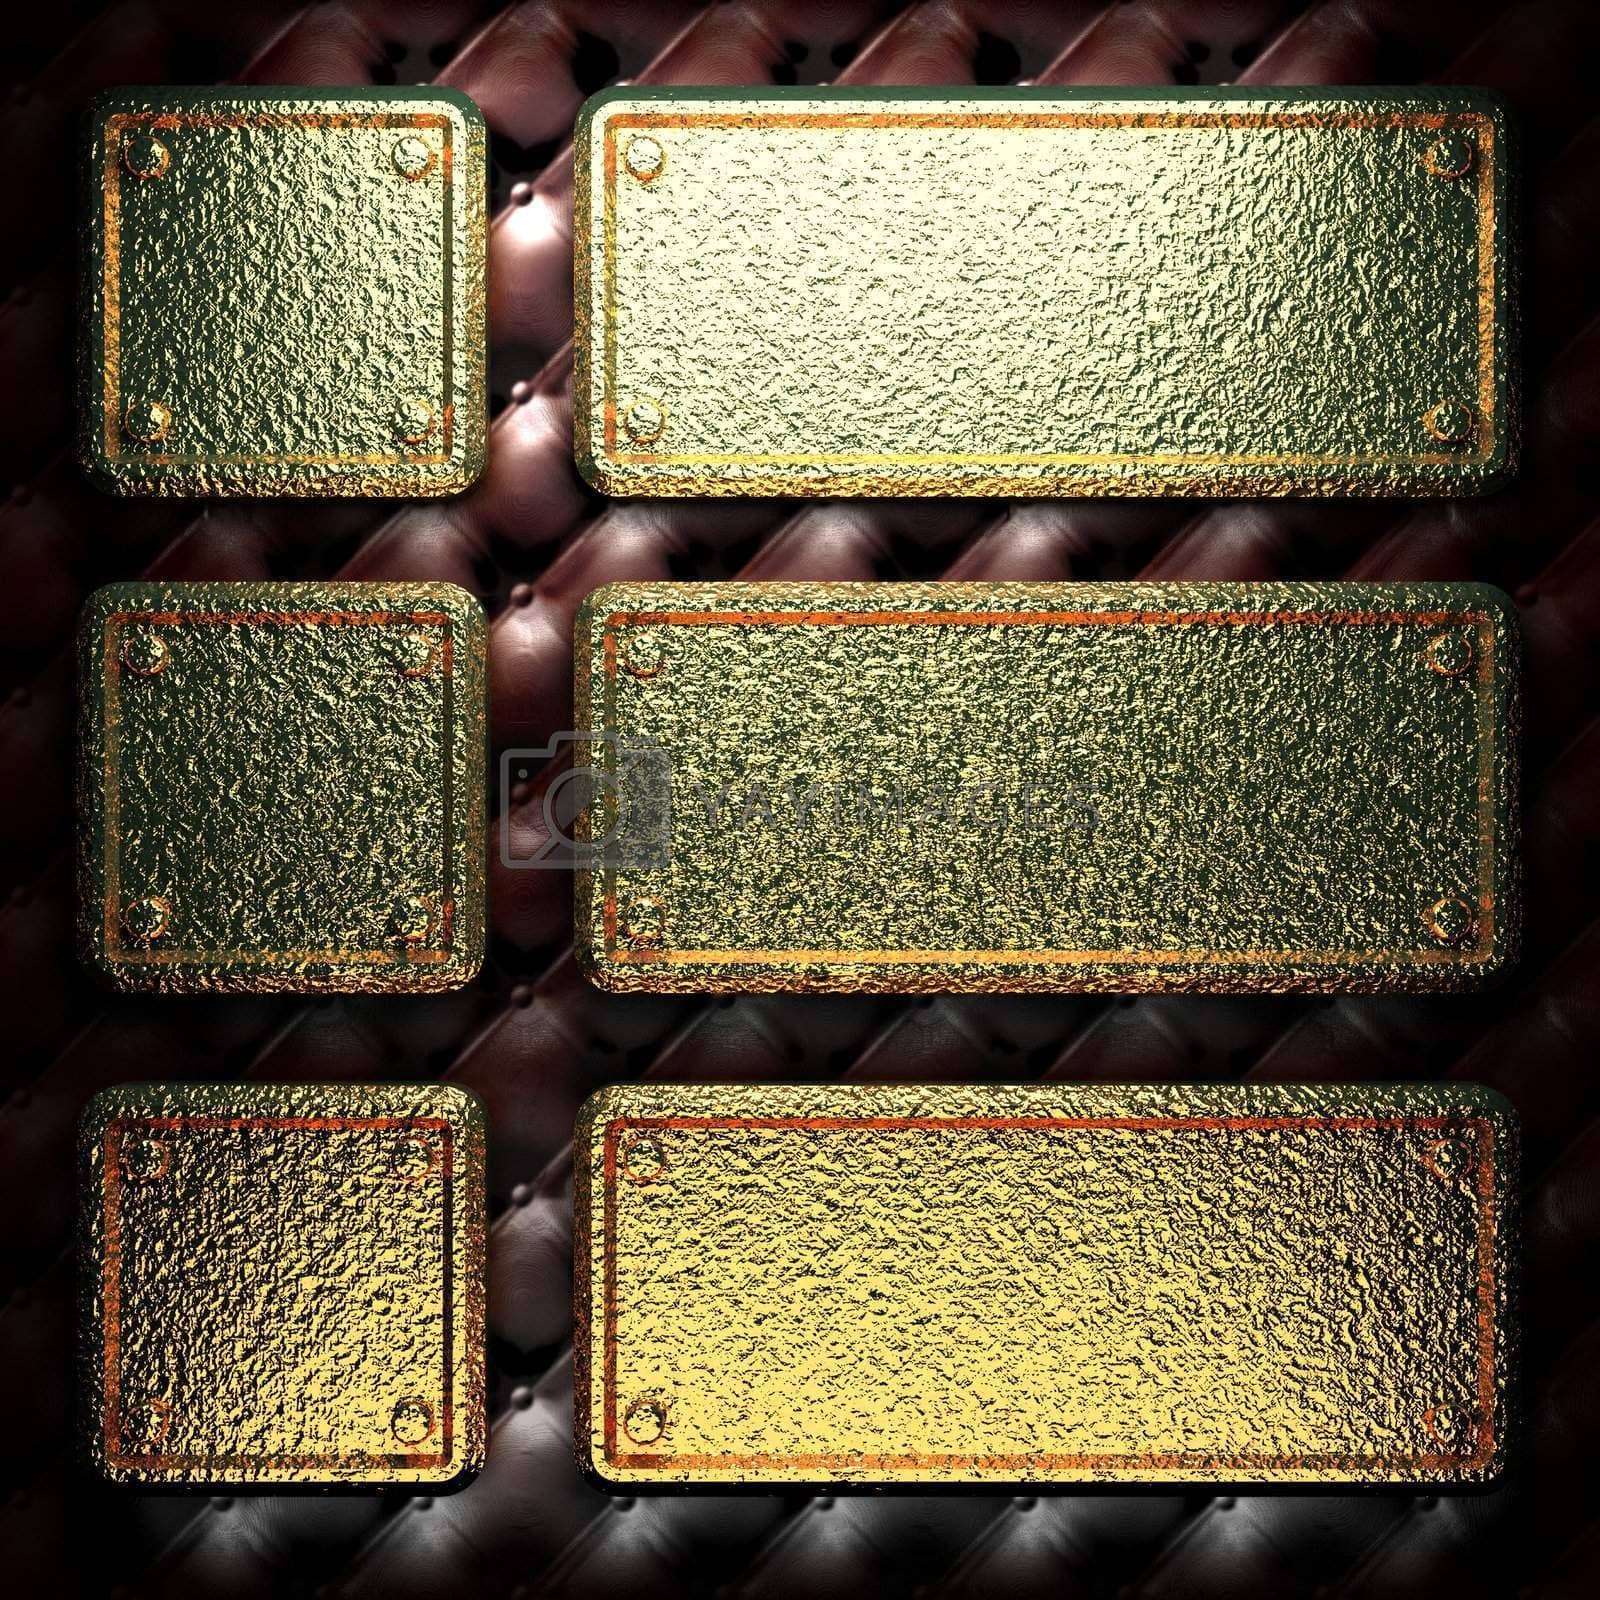 Royalty free image of golden plate on leather by icetray